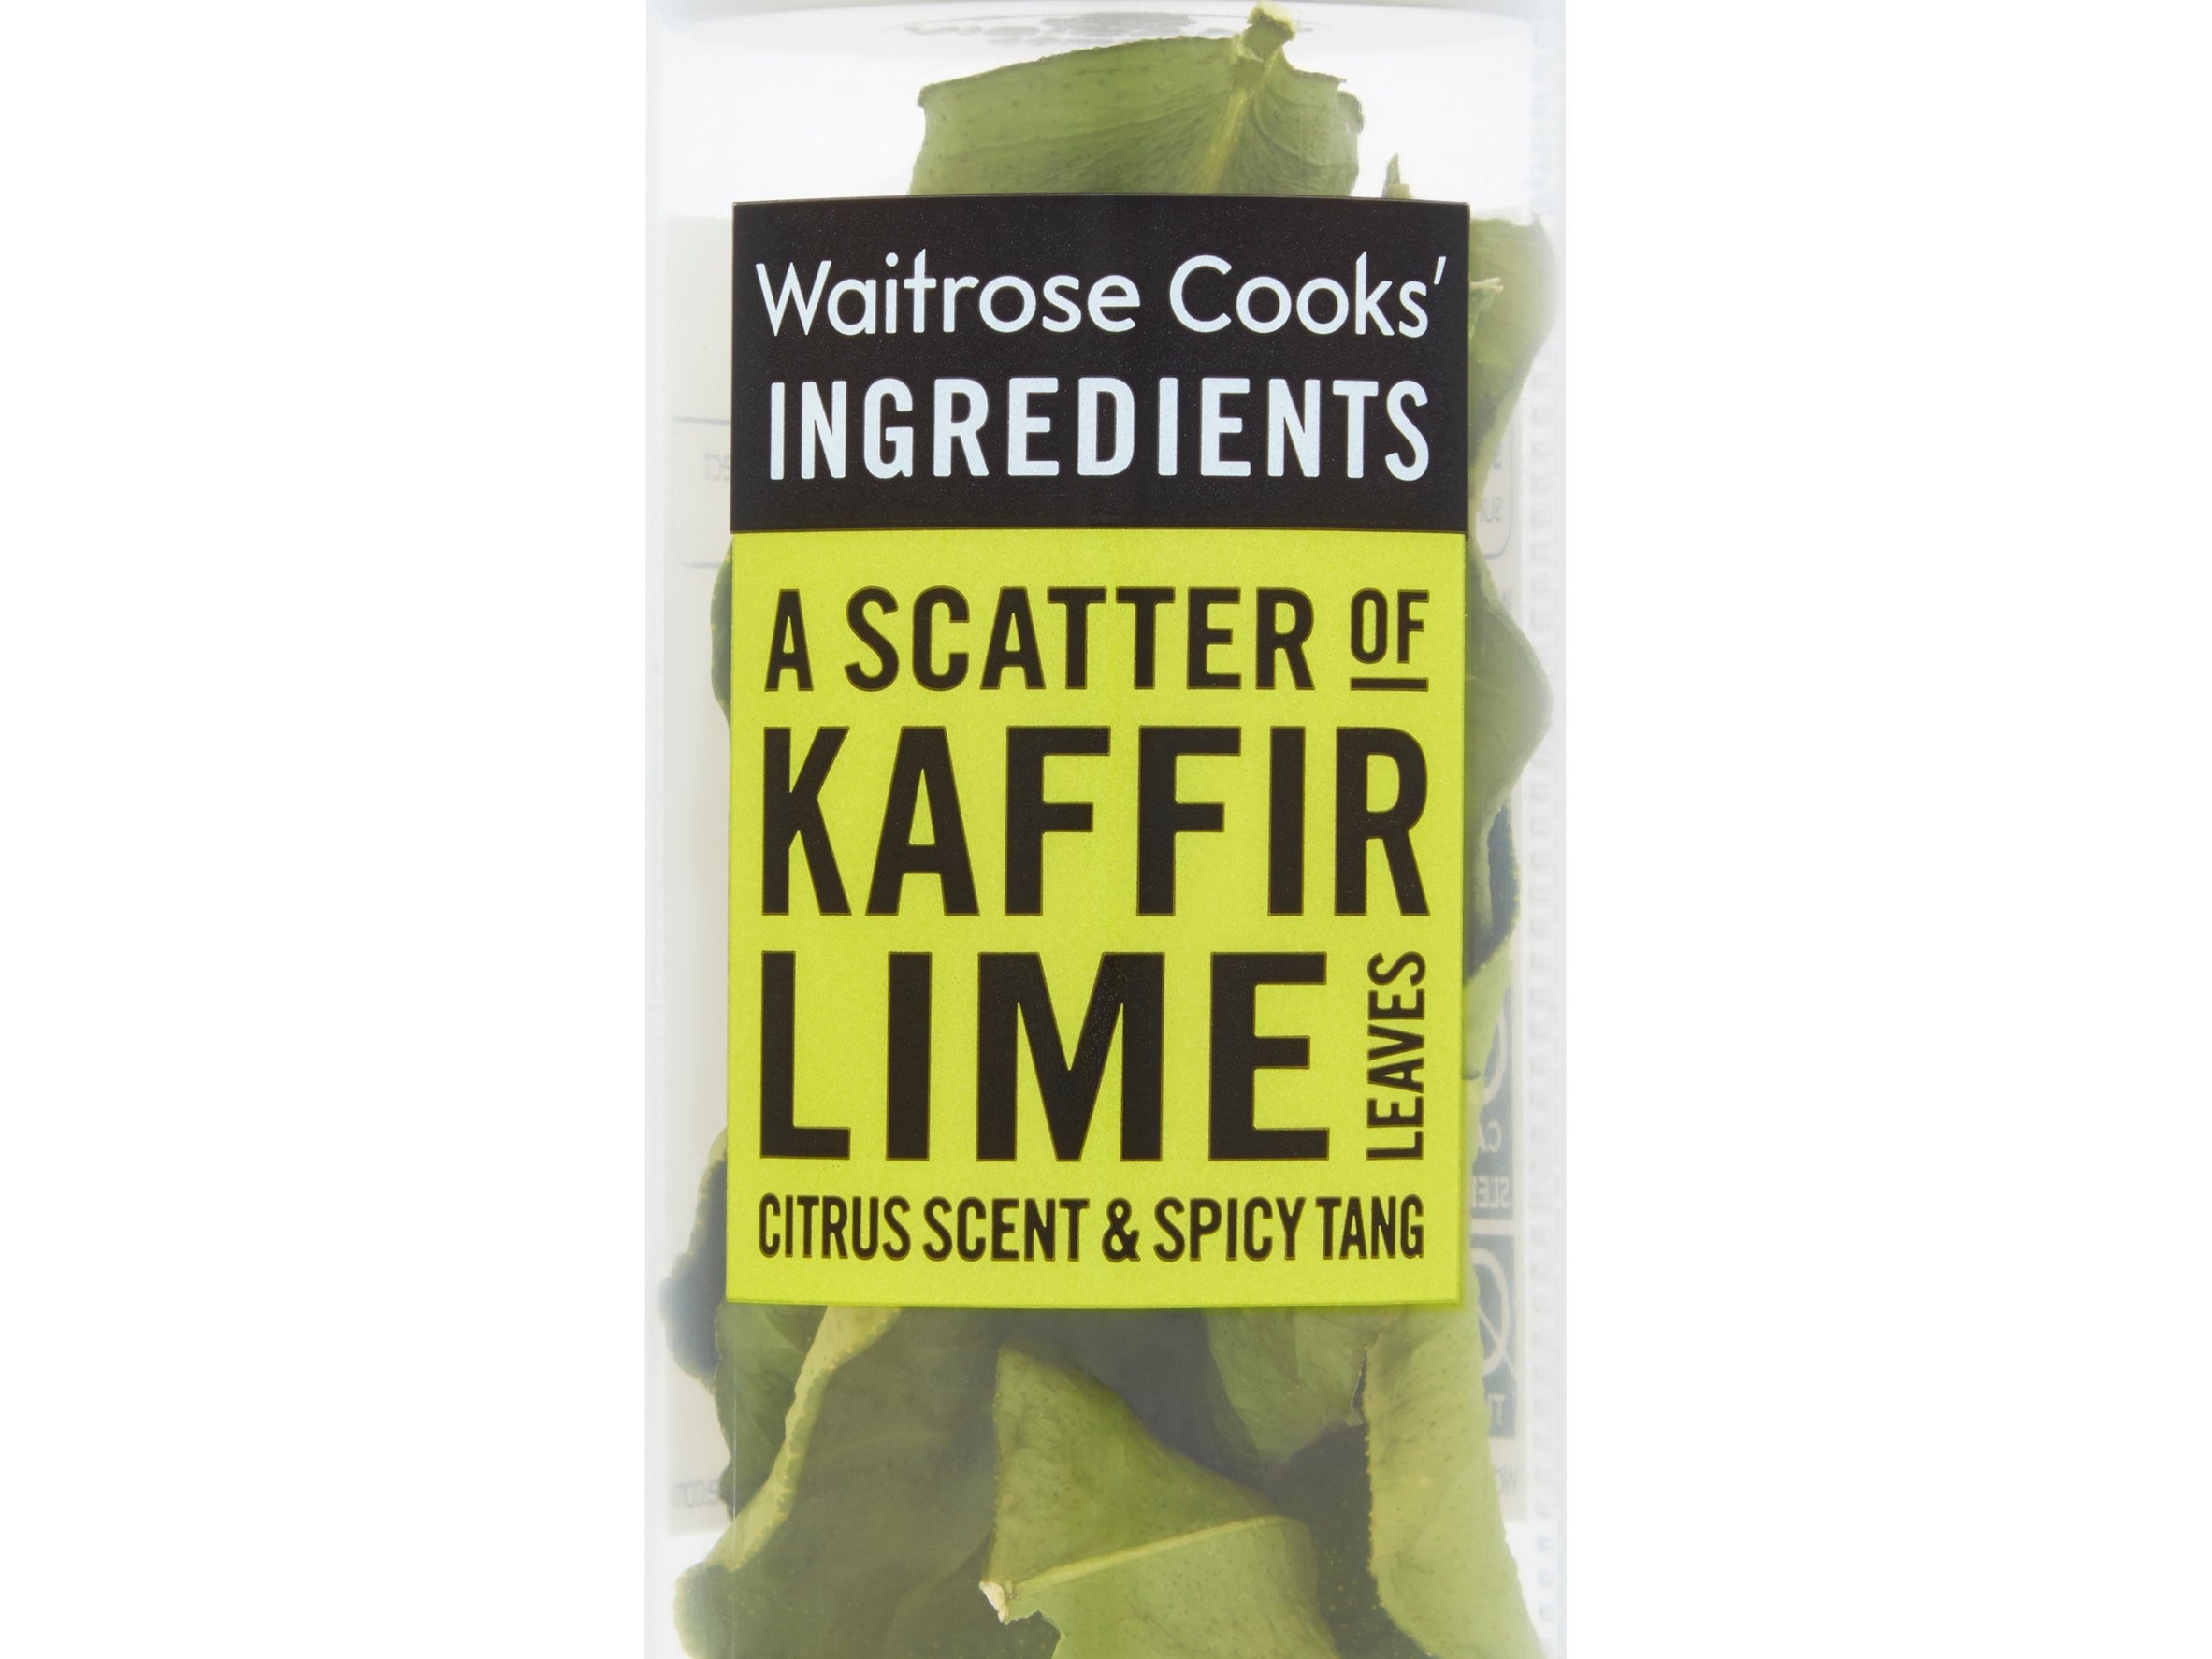 Waitrose will change the name of its Cook’s Ingredients Kaffir lime leaves to Makrut lime leaves by 2022